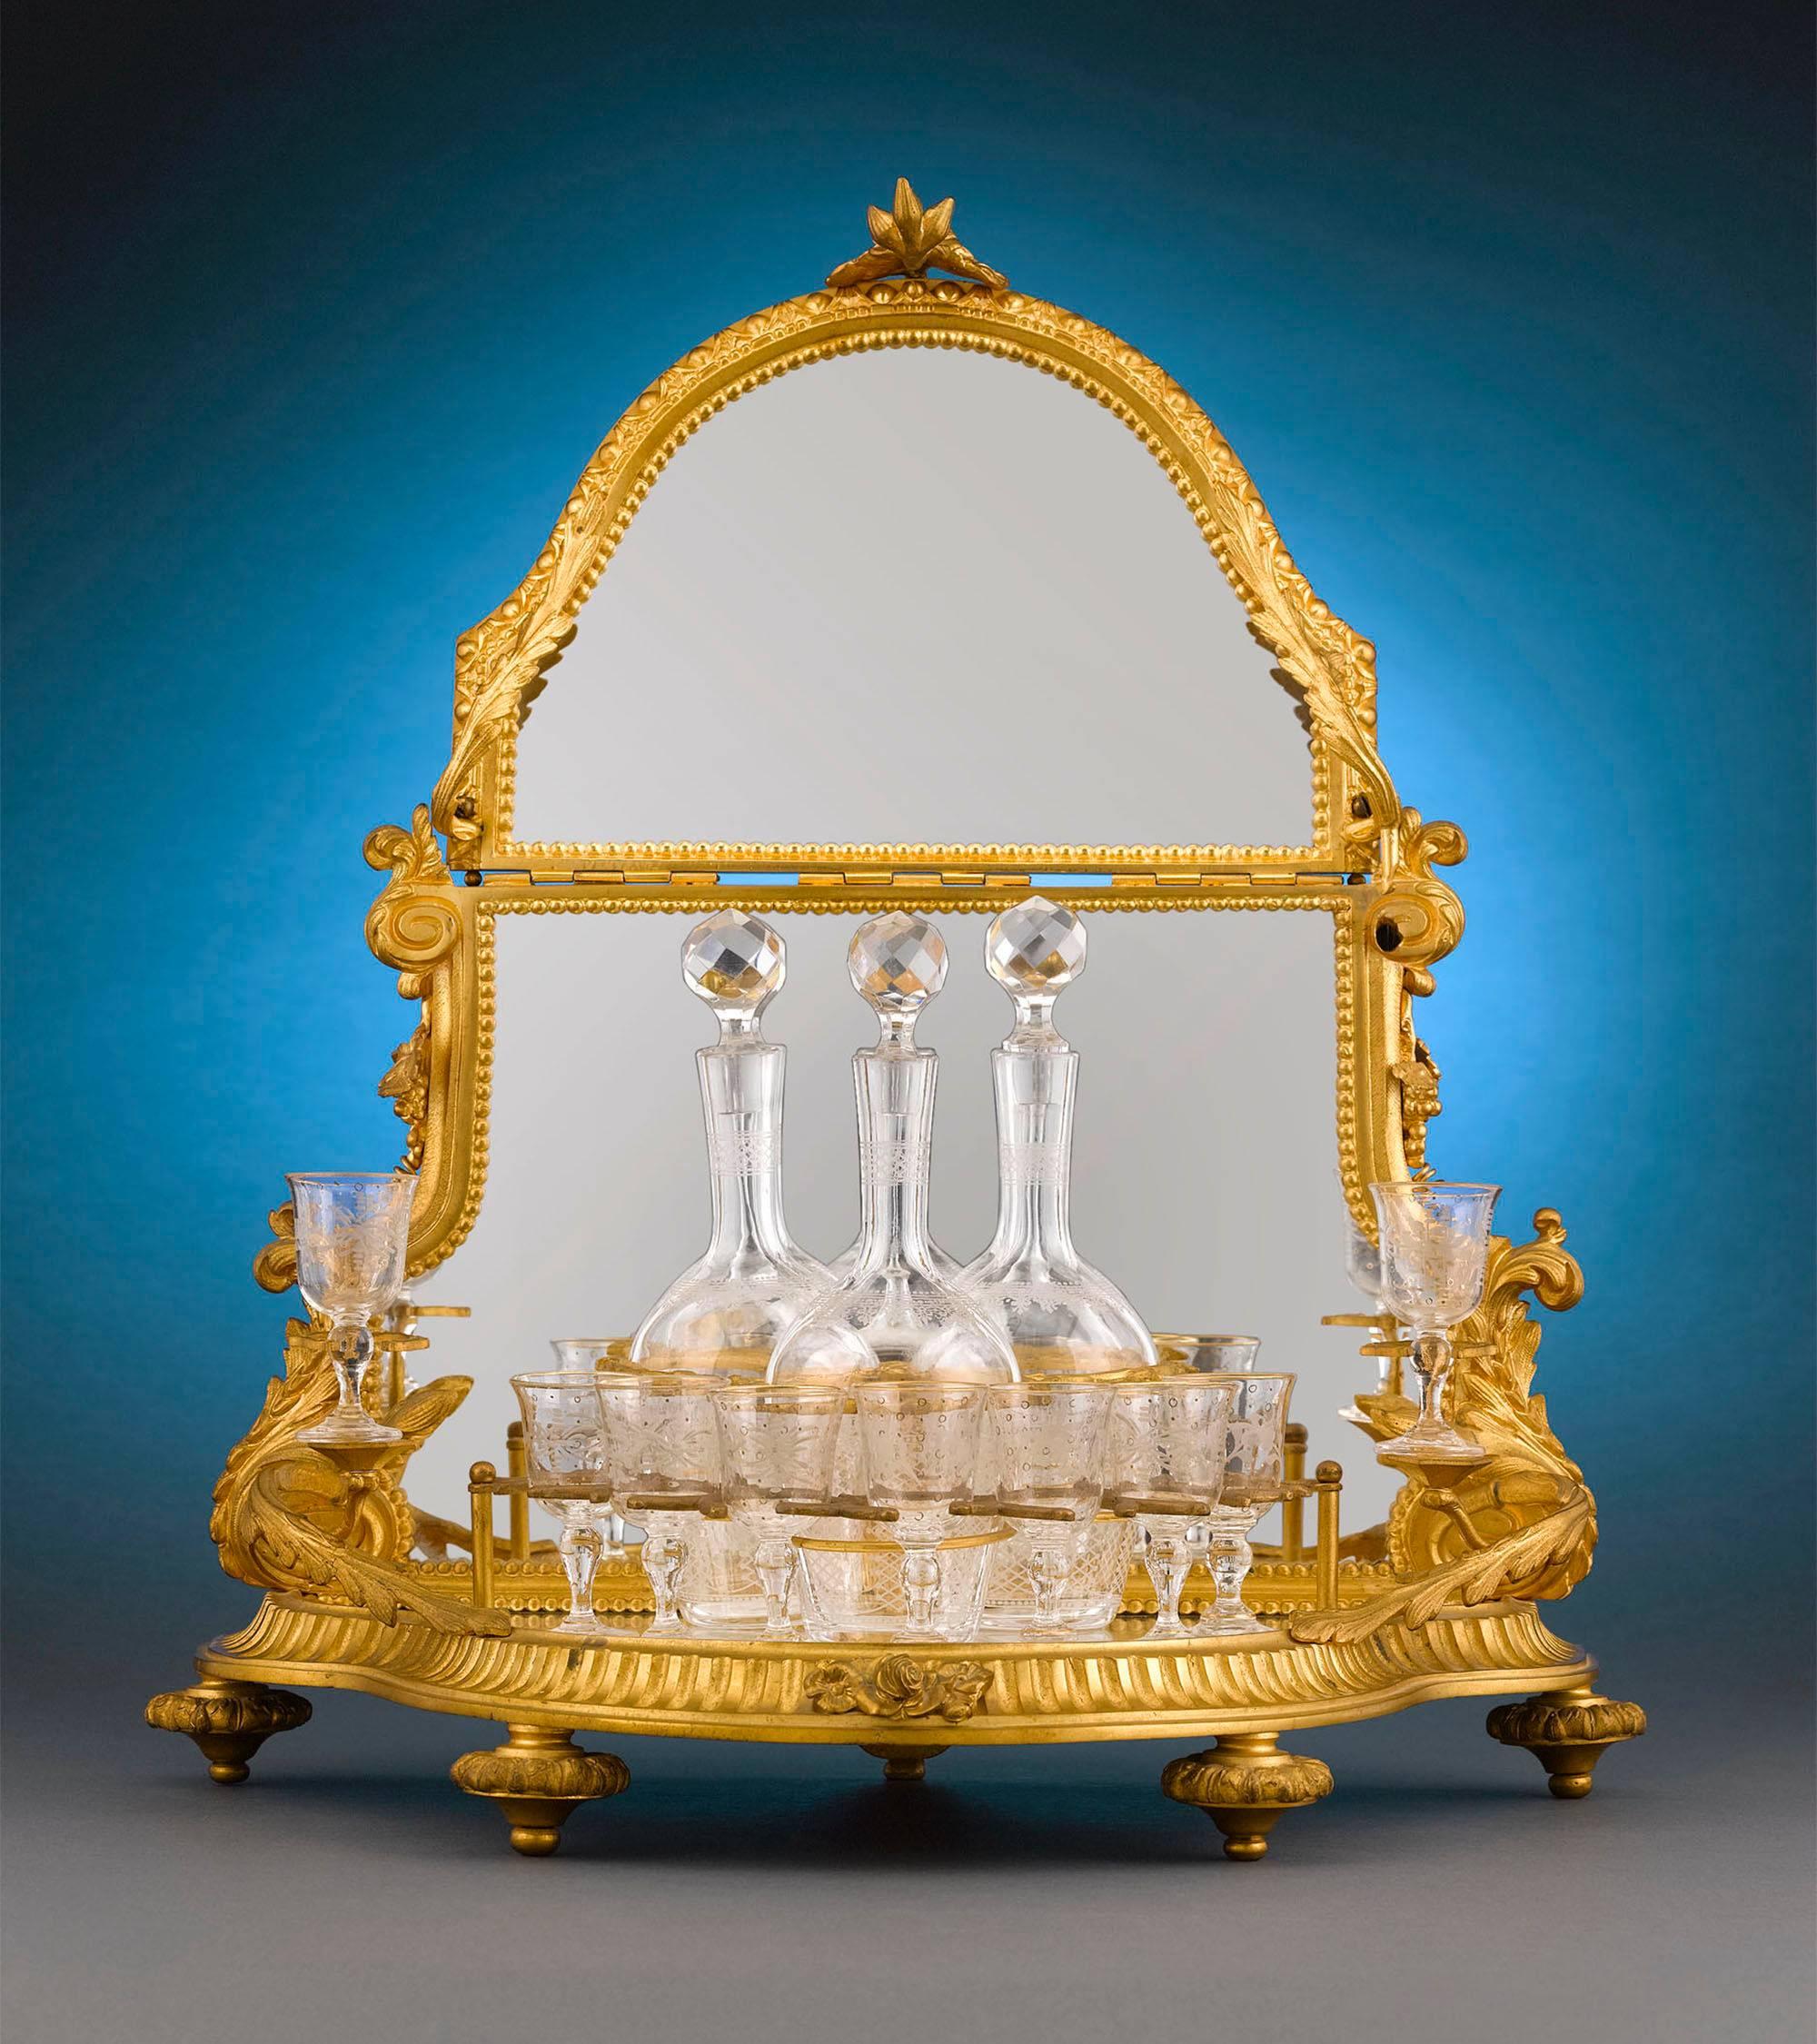 This rare and stunning cave à liqueur is crafted of beautifully detailed doré́ bronze in the form of a canopy. When locked, the canopy secures the three crystal decanters. A turn of the key allows the canopy to lift, giving access to the libations